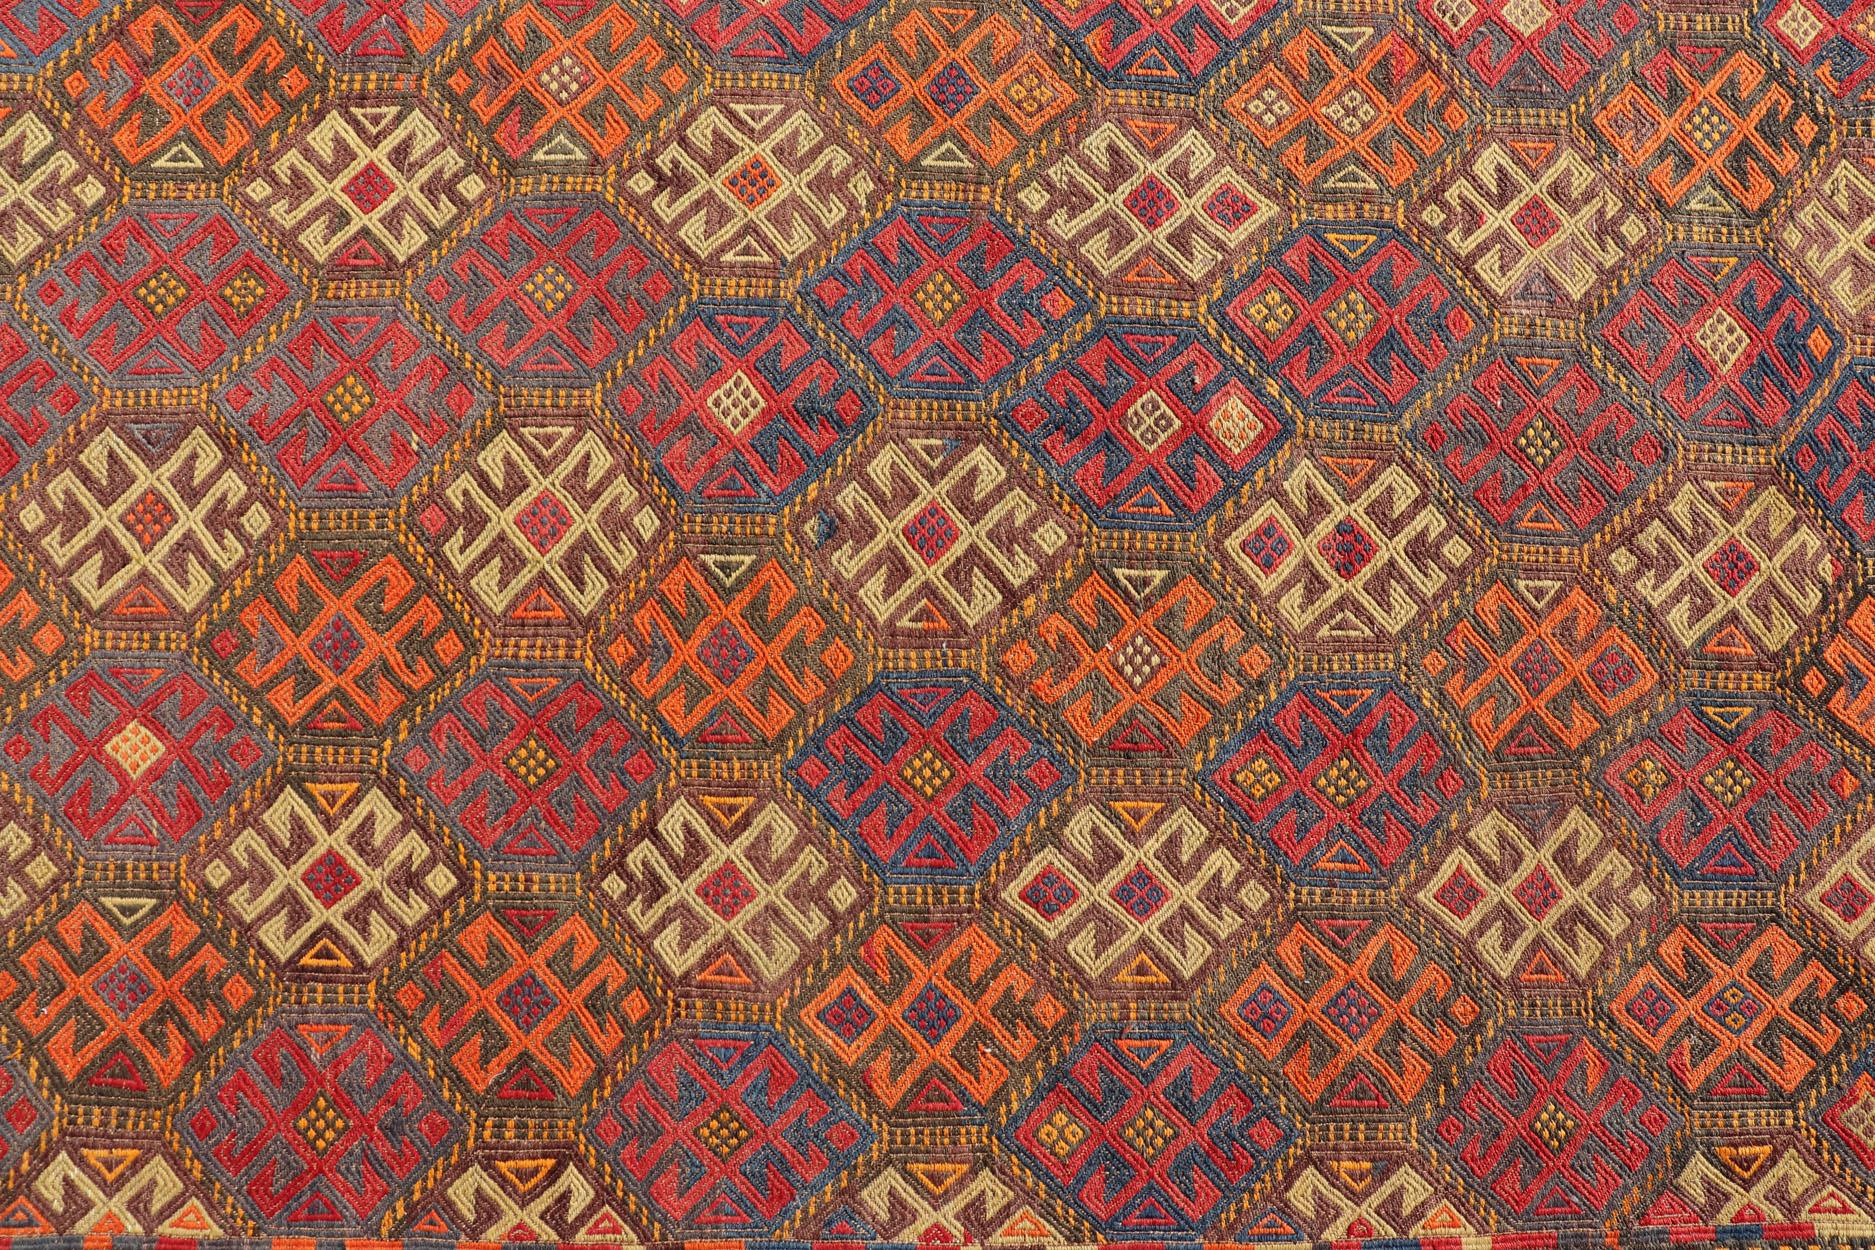 Vintage Turkish Gallery Kilim with all-over Geometric design in Sunset Tone. 
Vintage Gallery Runner Embroidered Kilim Runner, Keivan Woven Arts / rug EN-P13427, country of origin / type: Turkey / Kilim, circa Mid-20th Century.

Measures: 5'1 x